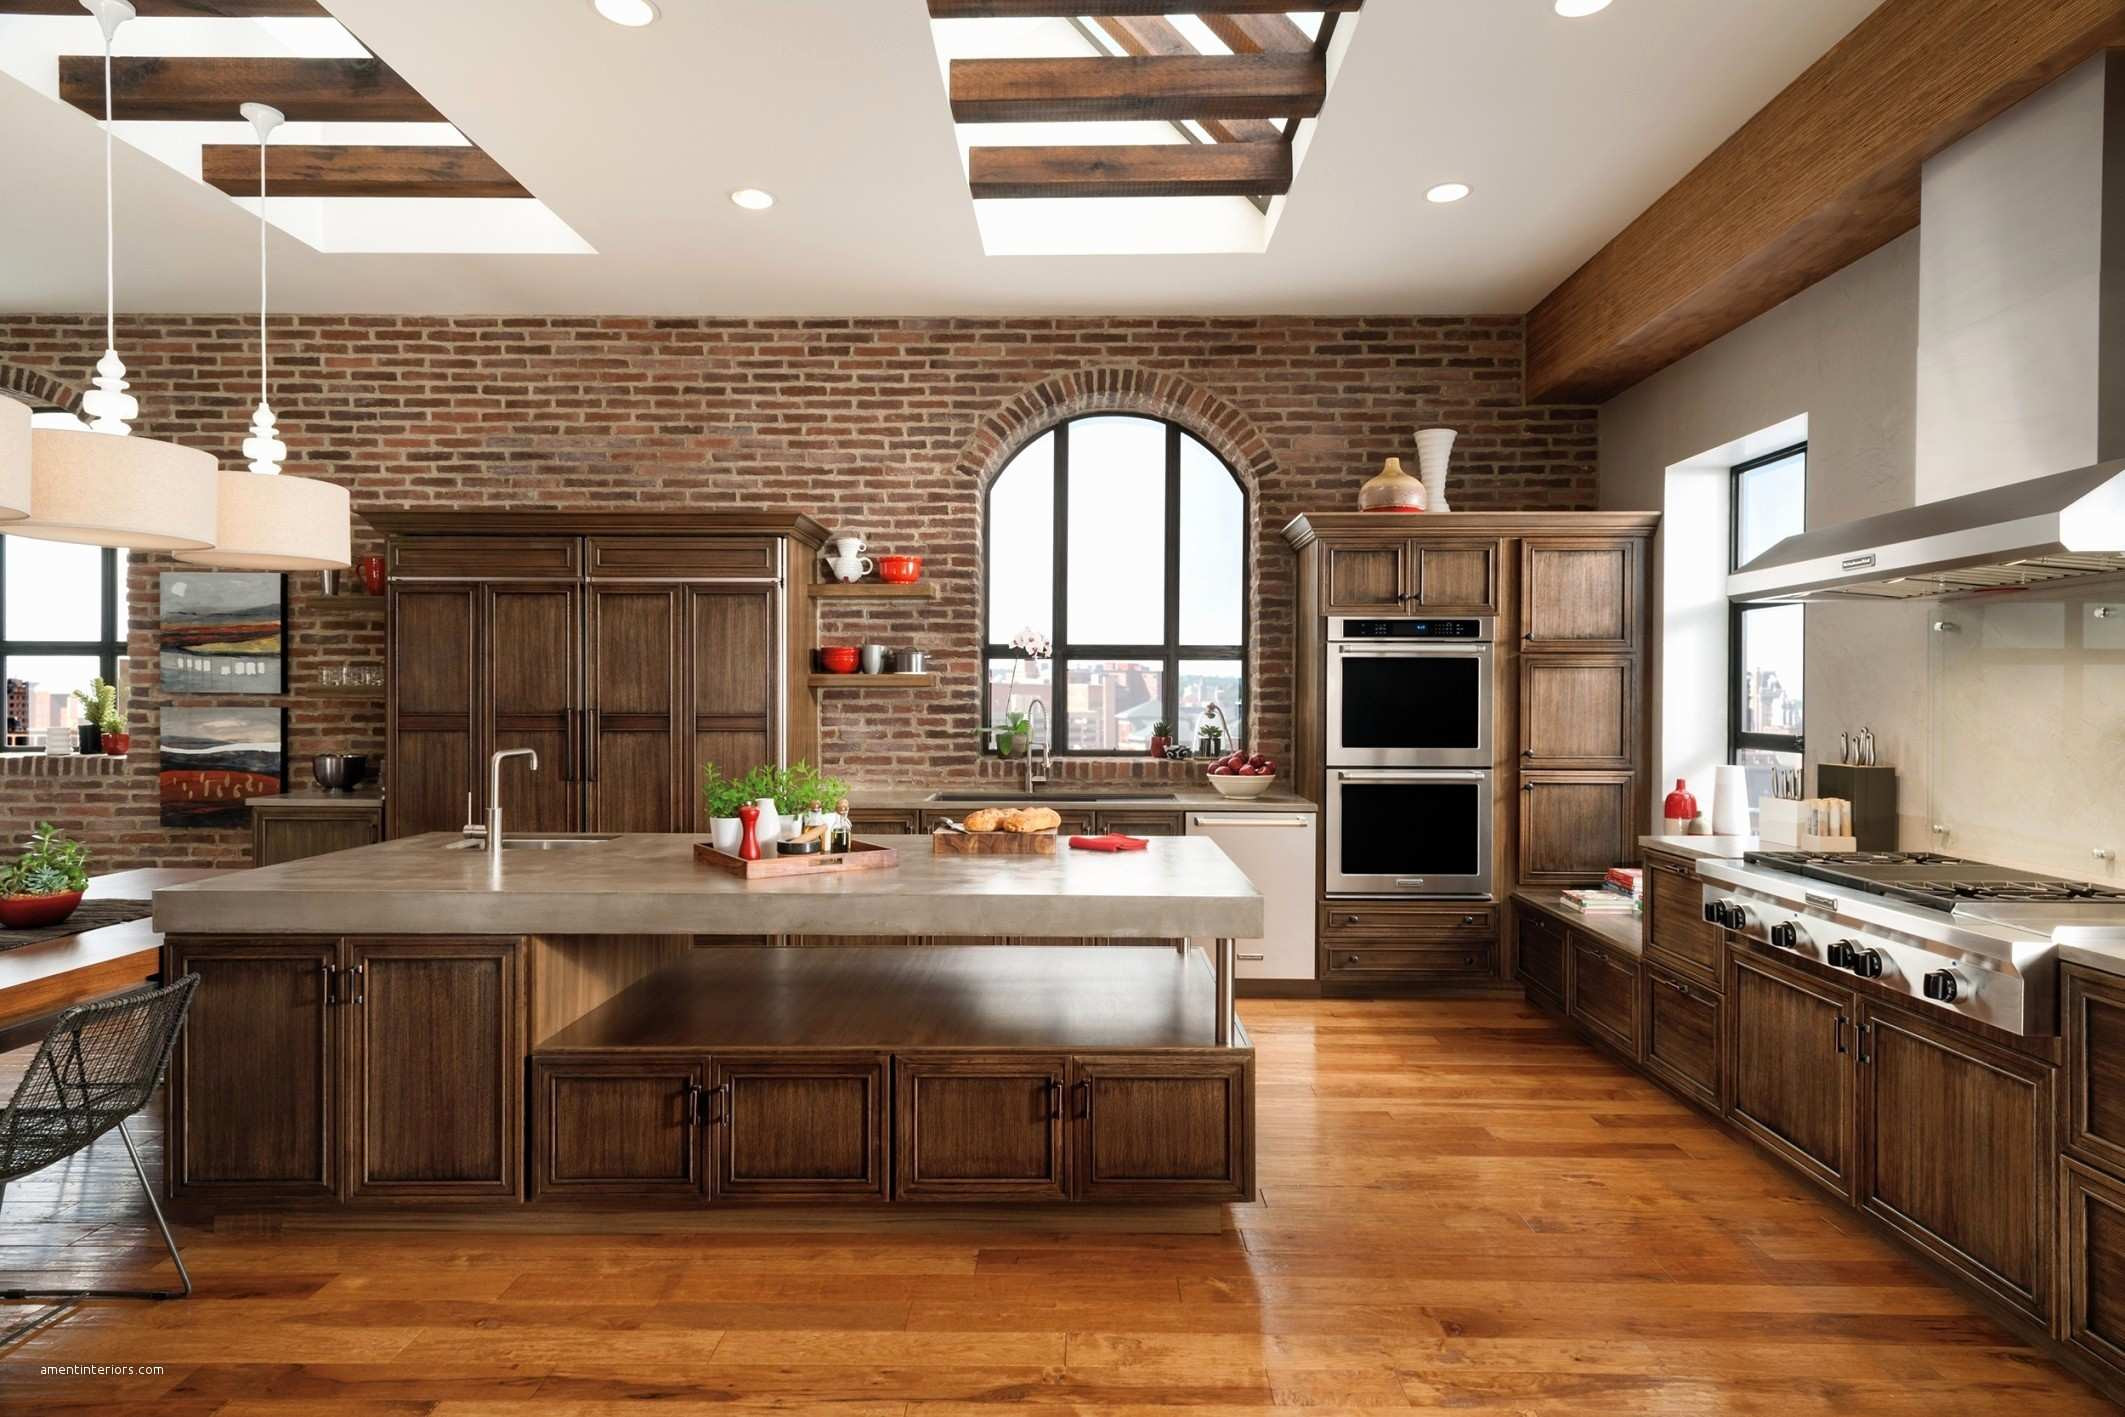 unfinished hardwood flooring home depot of little space oak kitchen cabinets and home depot unfinished wood inside nyc oak kitchen cabinets inspired on ready made kitchen cabinets lovely kitchen cabinet 0d bright lights